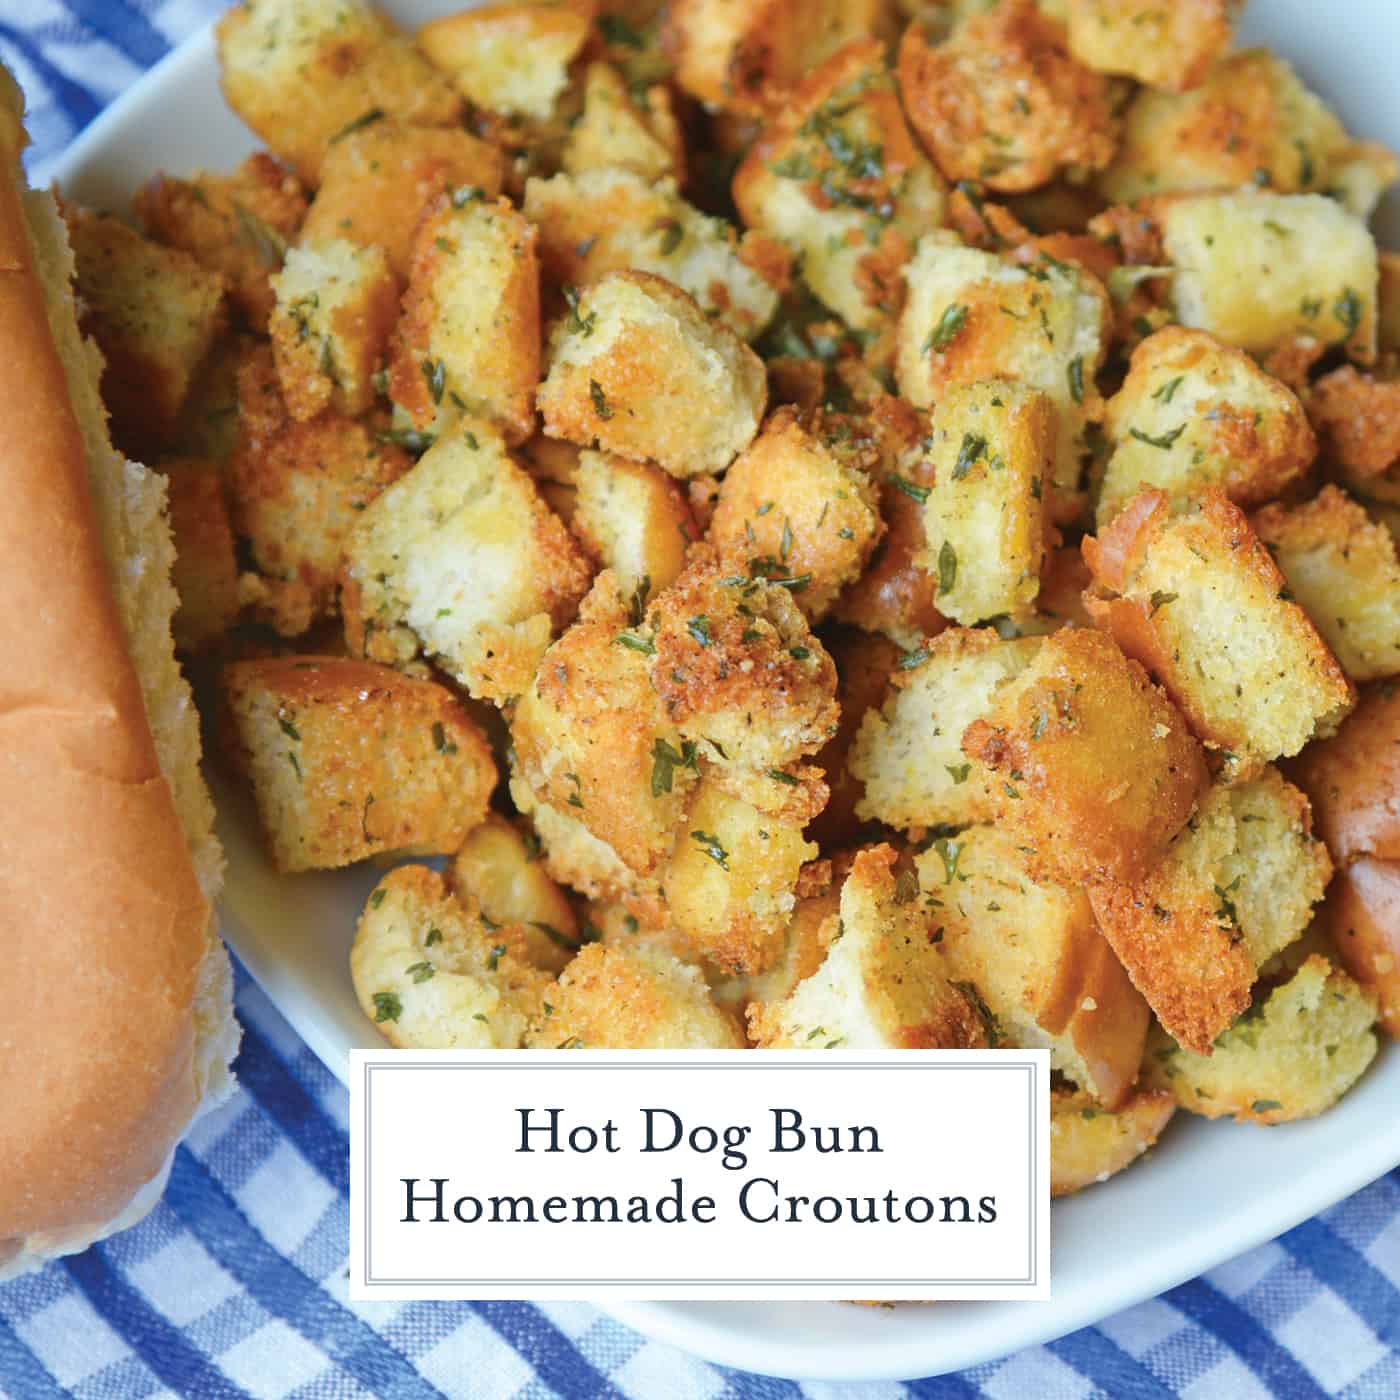 Hot Dog Bun Homemade Croutons with garlic, salt and parsley are the best for salads, soup and more! Learn how to make croutons easily with this crouton recipe. #homemadecroutons #croutonrecipe #howtomakecroutons www.savoryexperiments.com 